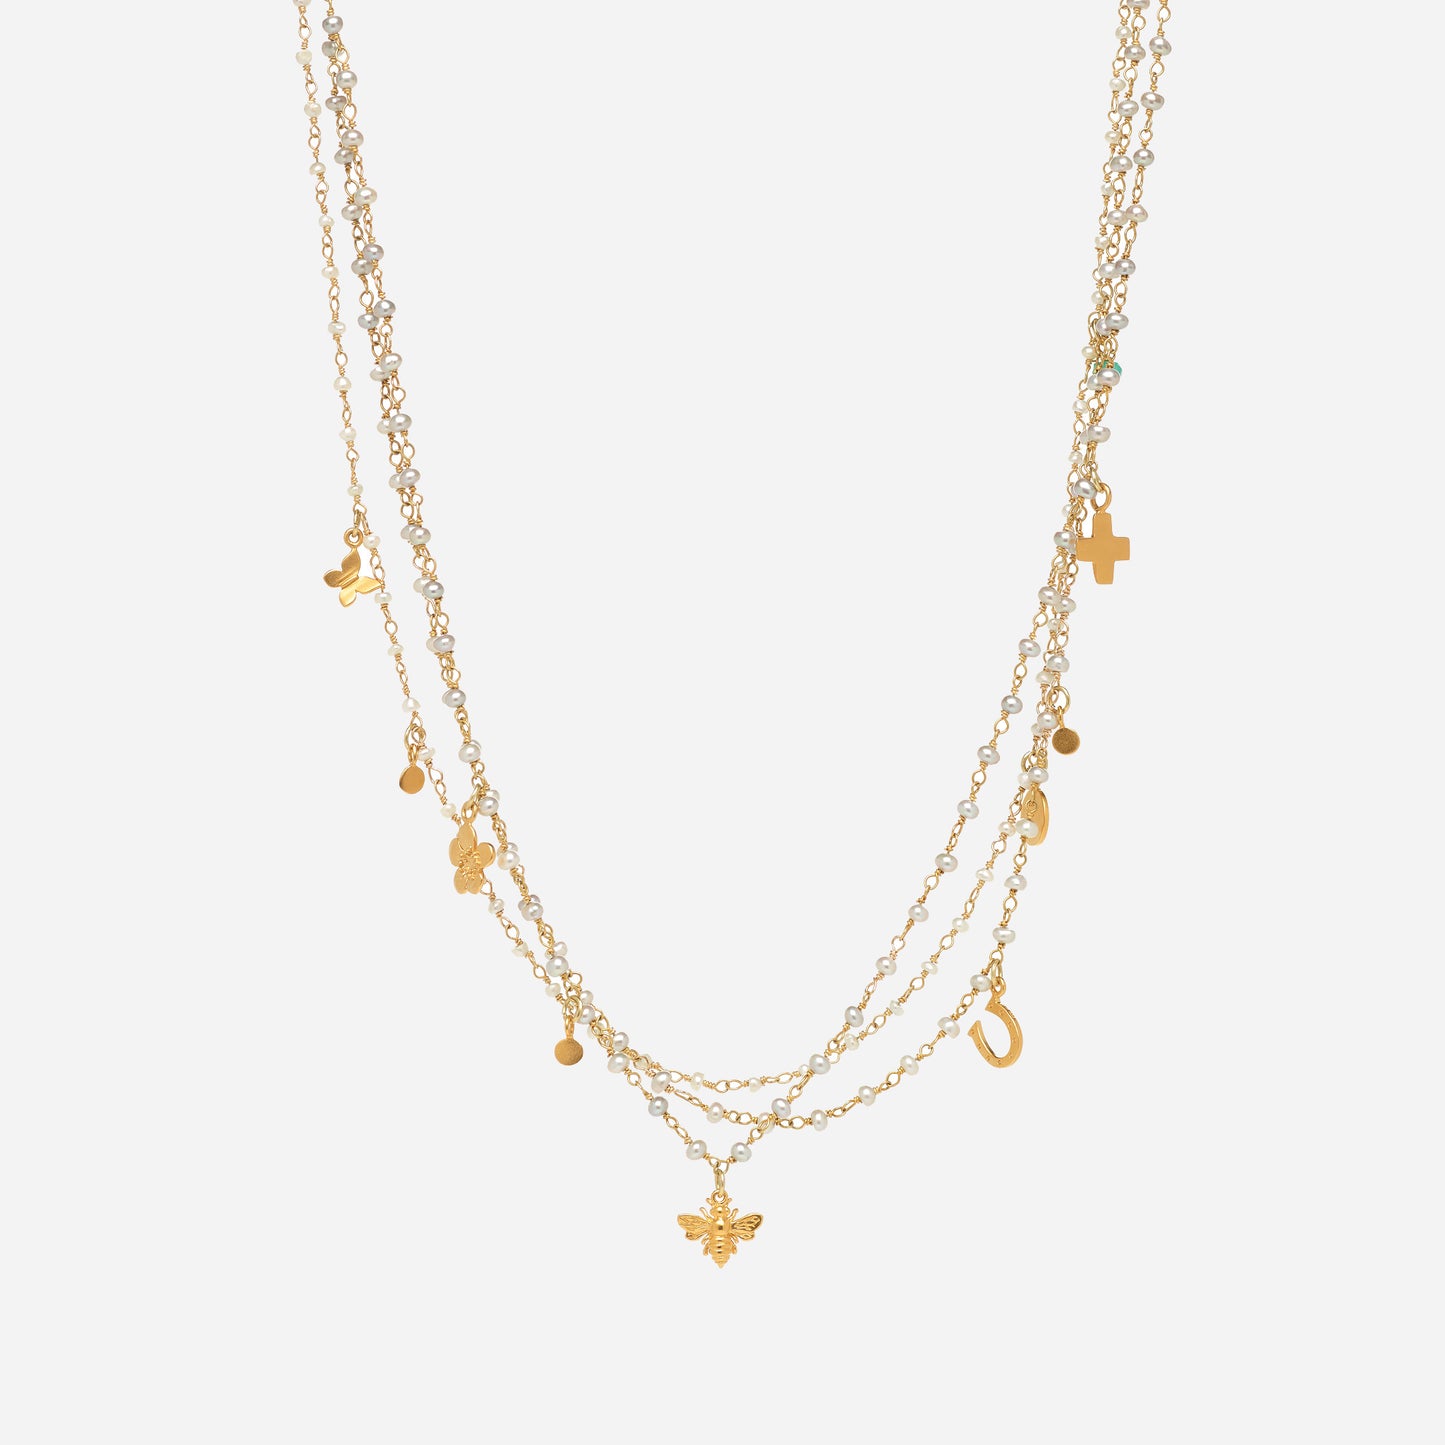 "EXTRA CHARM" Necklace